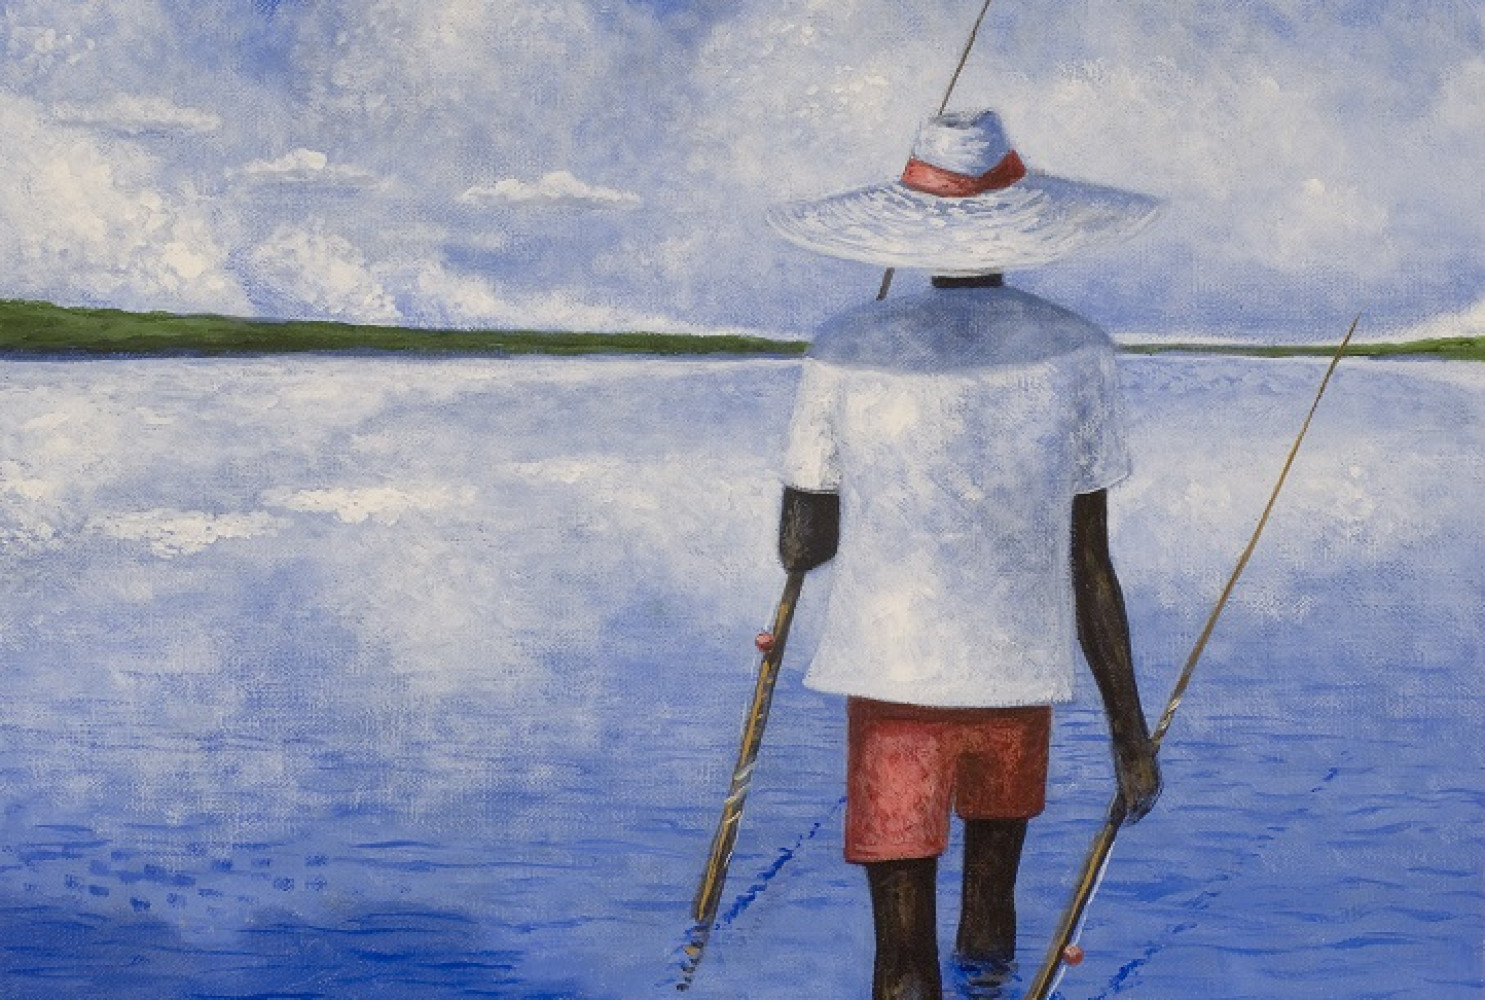 Fishing Spot, 2011; by Jonathan Green (American b. 1955); oil on canvas,11 x 14 inches; image copyright Jonathan Green, courtesy of Vibrant Vision Collection of Jonathan Green and Richard Weedman 